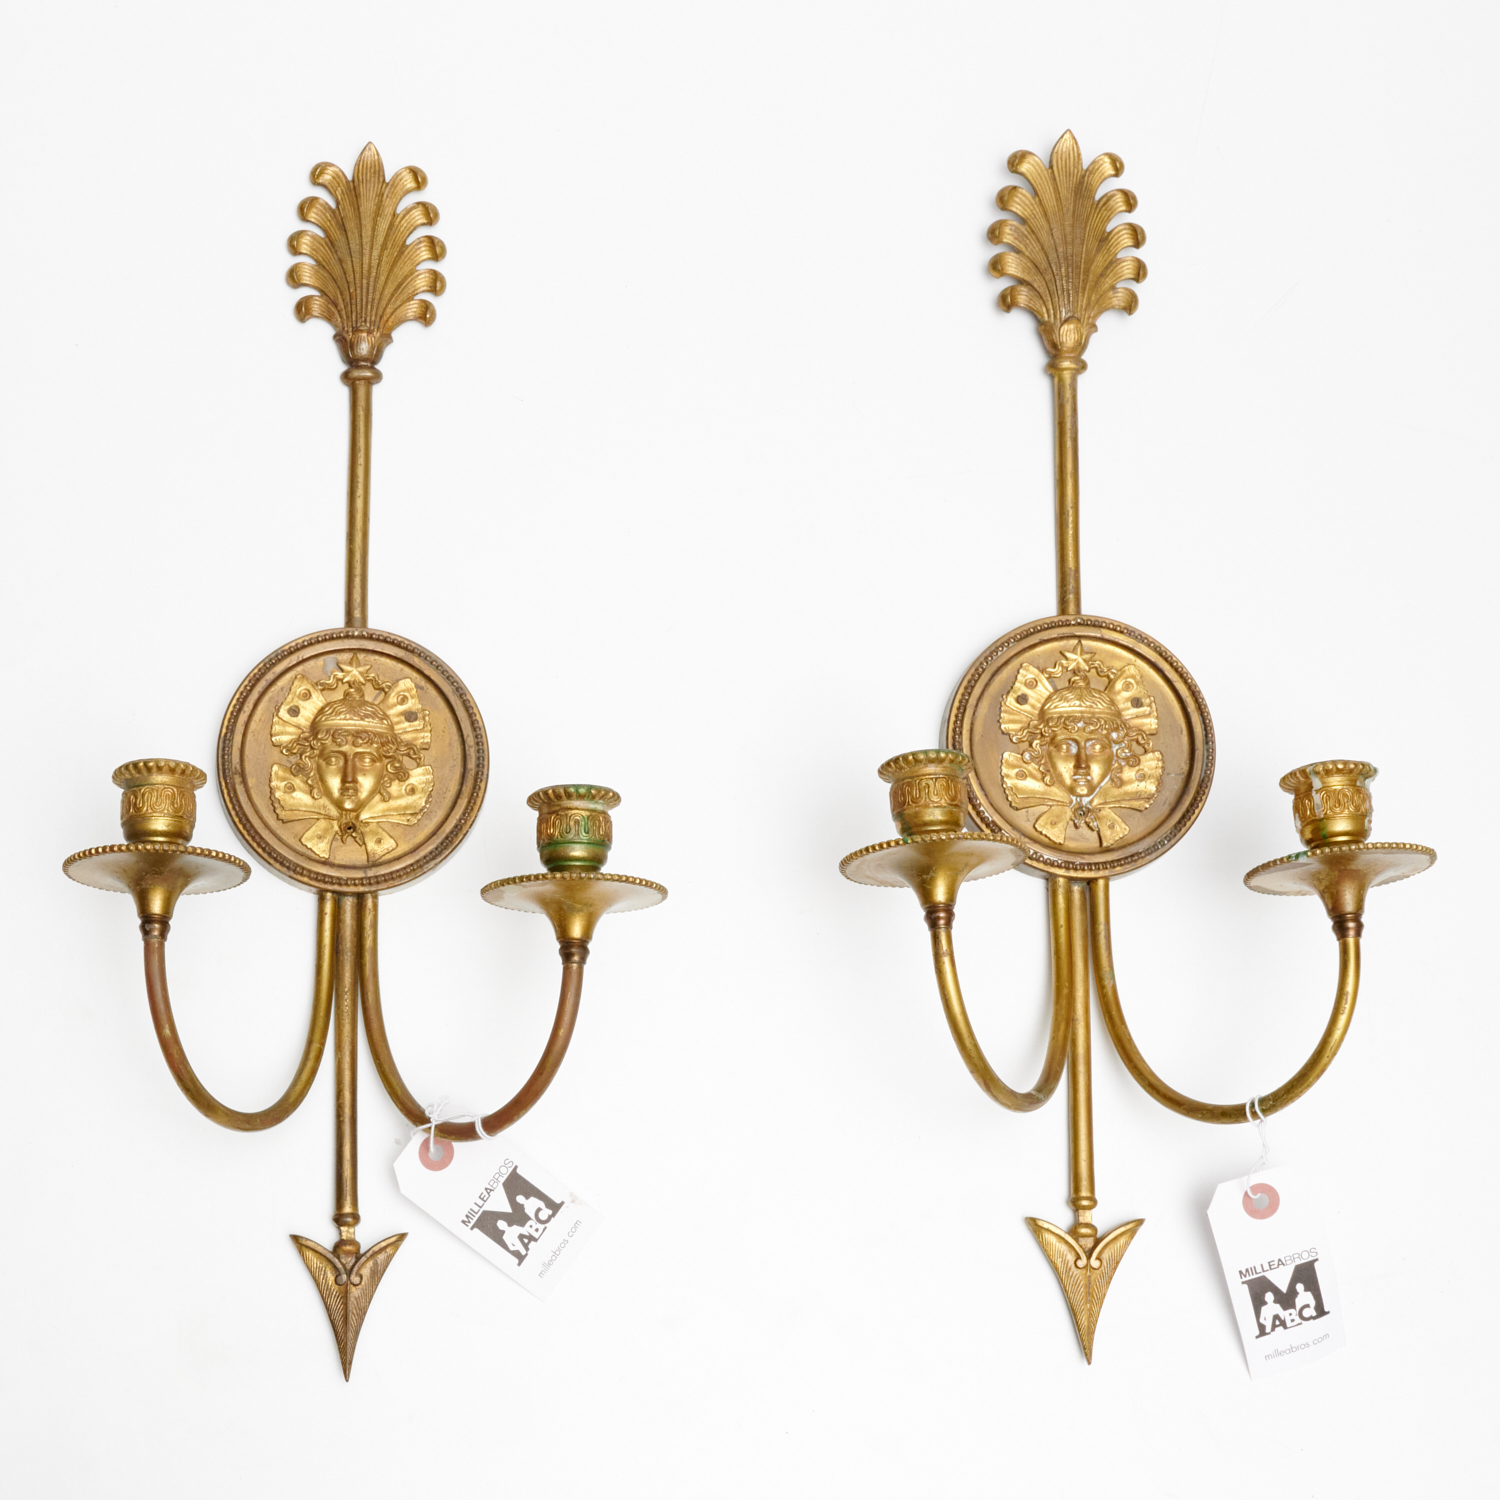 PAIR FRENCH EMPIRE STYLE WALL SCONCES 2ce06e